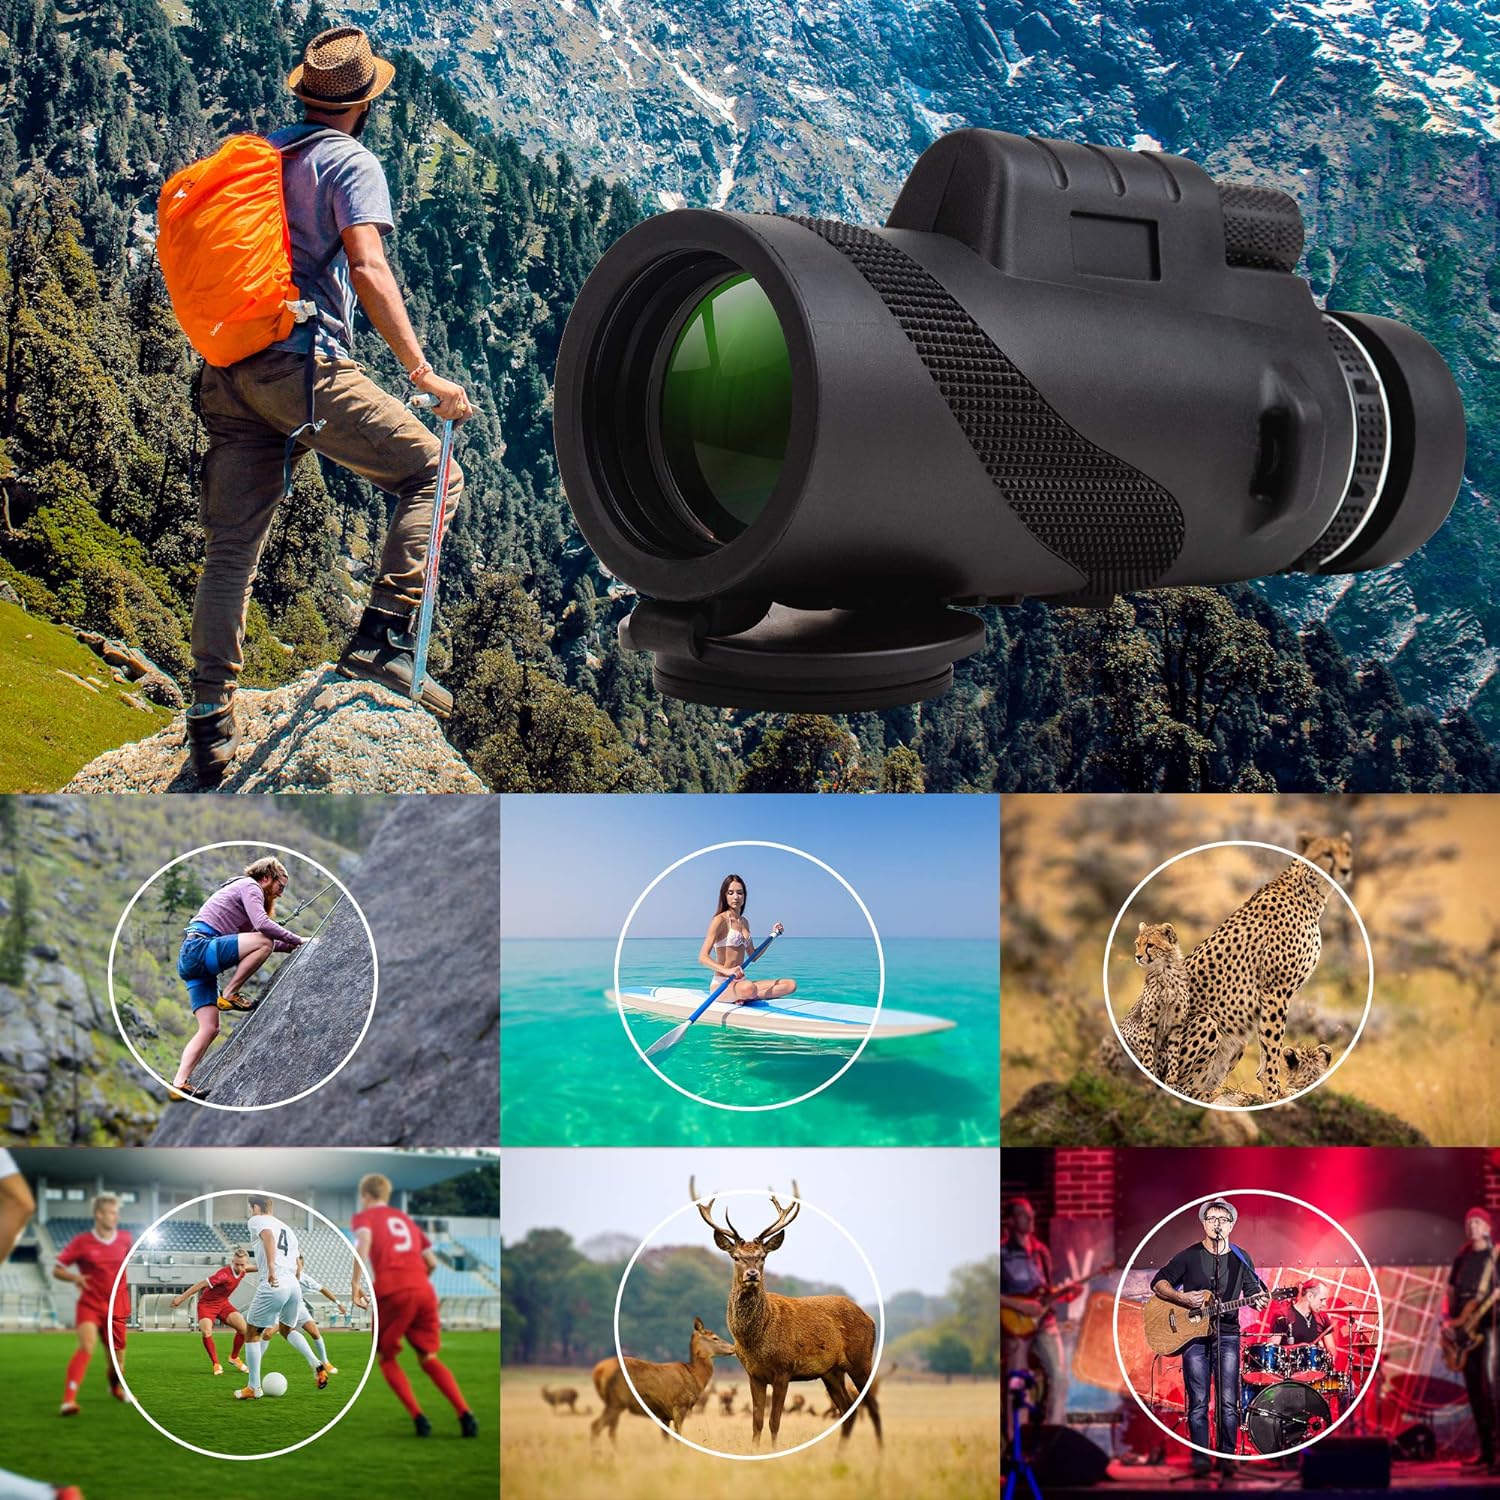 Monocular by Strong Impact, Monocular Compact Scope, High Power monocular Telescope, Zoom Monocular for Adults. 12x Magnification Zoom Lens, High Definition with Multi-Coated Lens, Carrying case